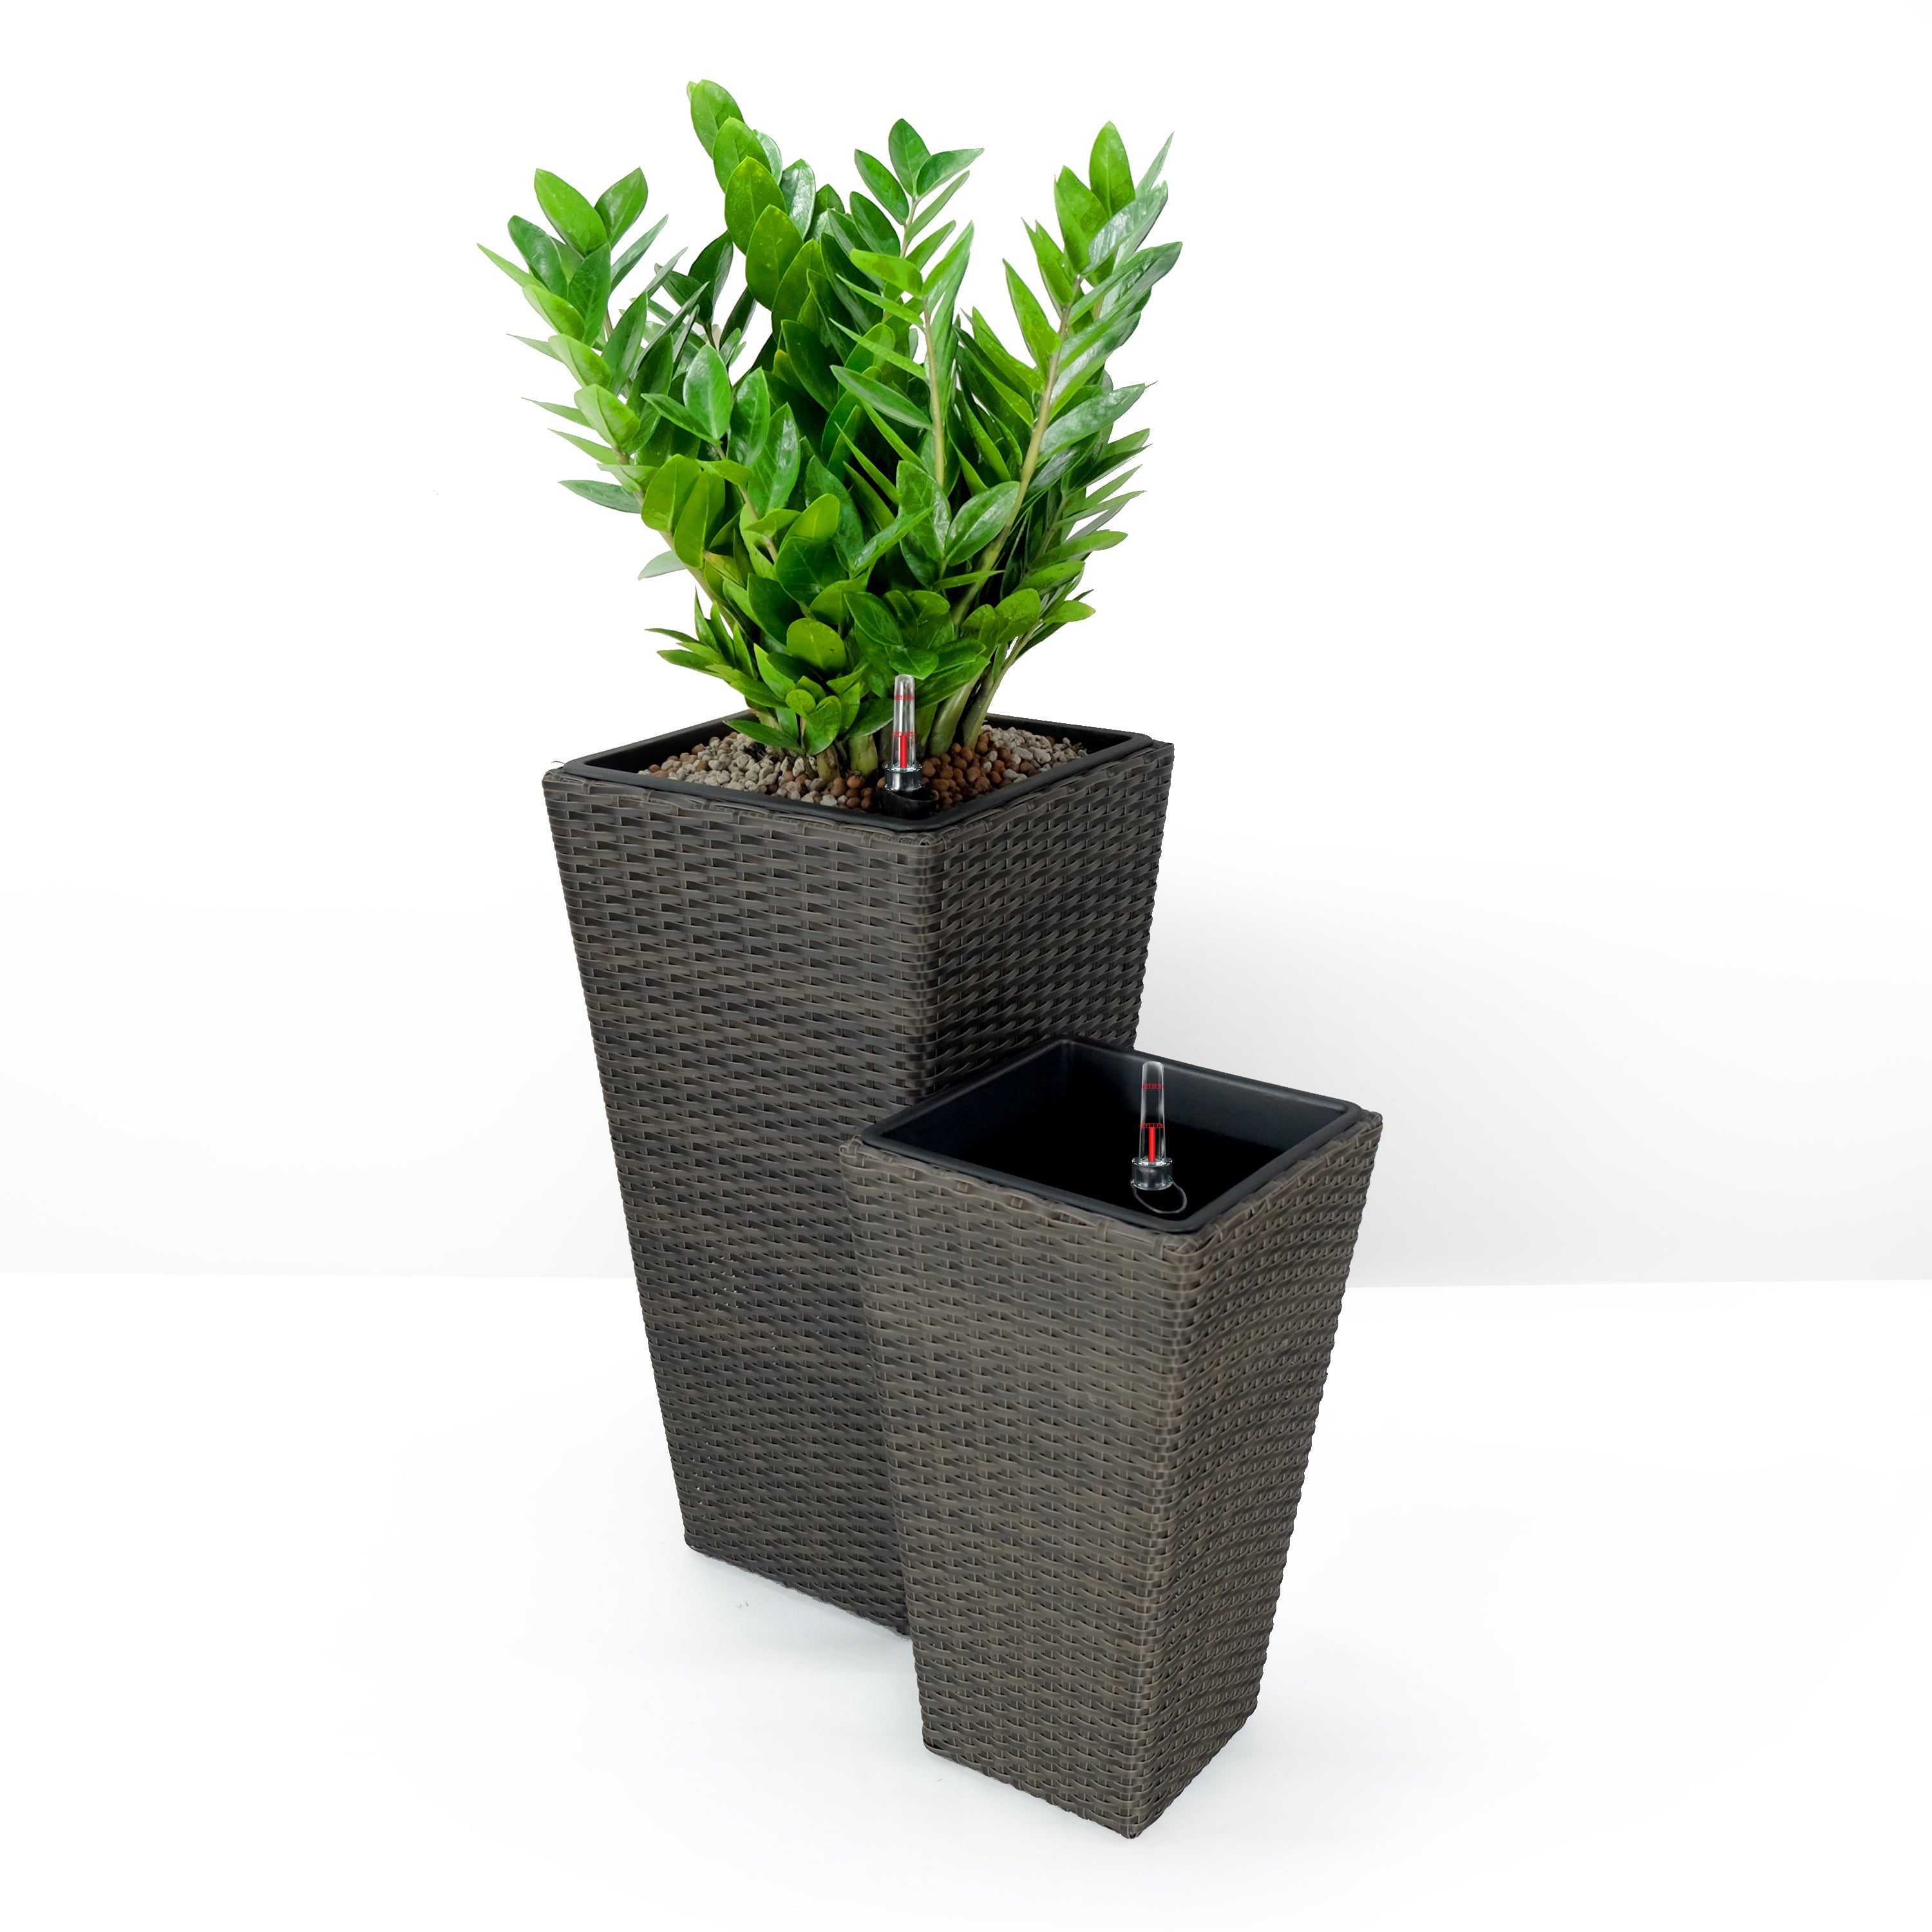 2-Pack-Self-watering-Planter-Hand-Woven-Wicker-Square-Expresso-Pots-&-Planters